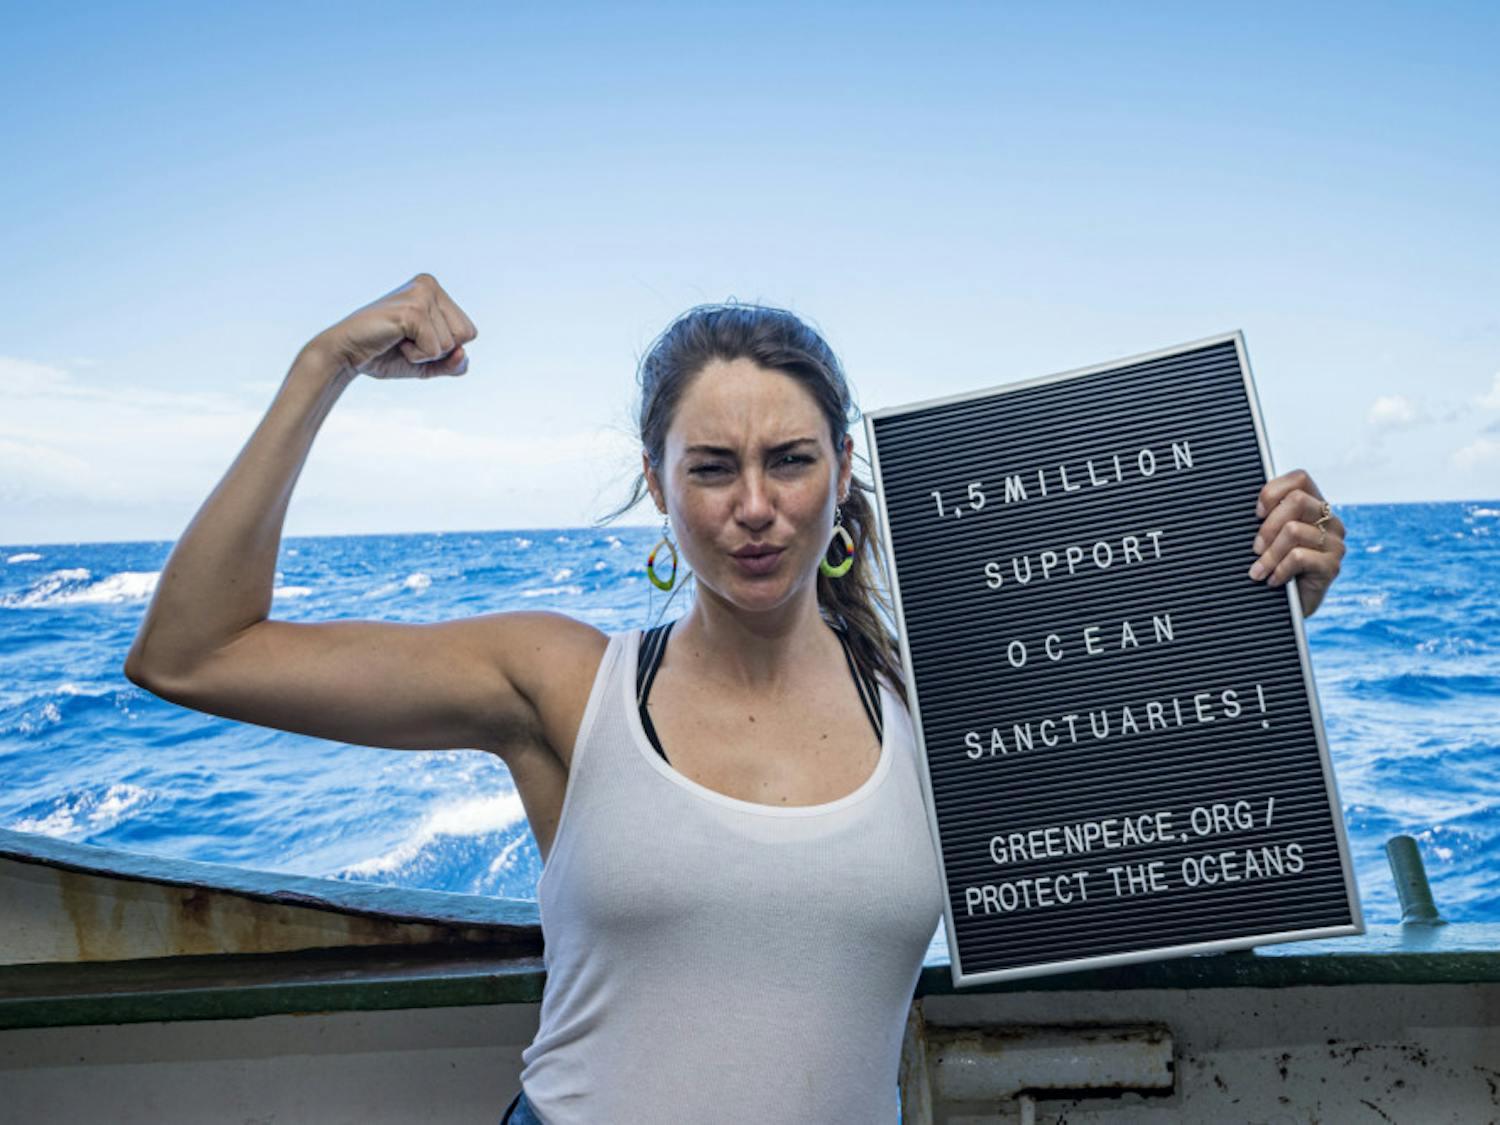 Shailene Woodley joined UF researchers Nerine Constant and Alexandra Gulick on a Greenpeace expedition to the Sargasso Sea. Woodley wrote a TIME article detailing her experiences on the expedition and how she will continue advocating for protecting the oceans.© Shane Gross / Greenpeace 